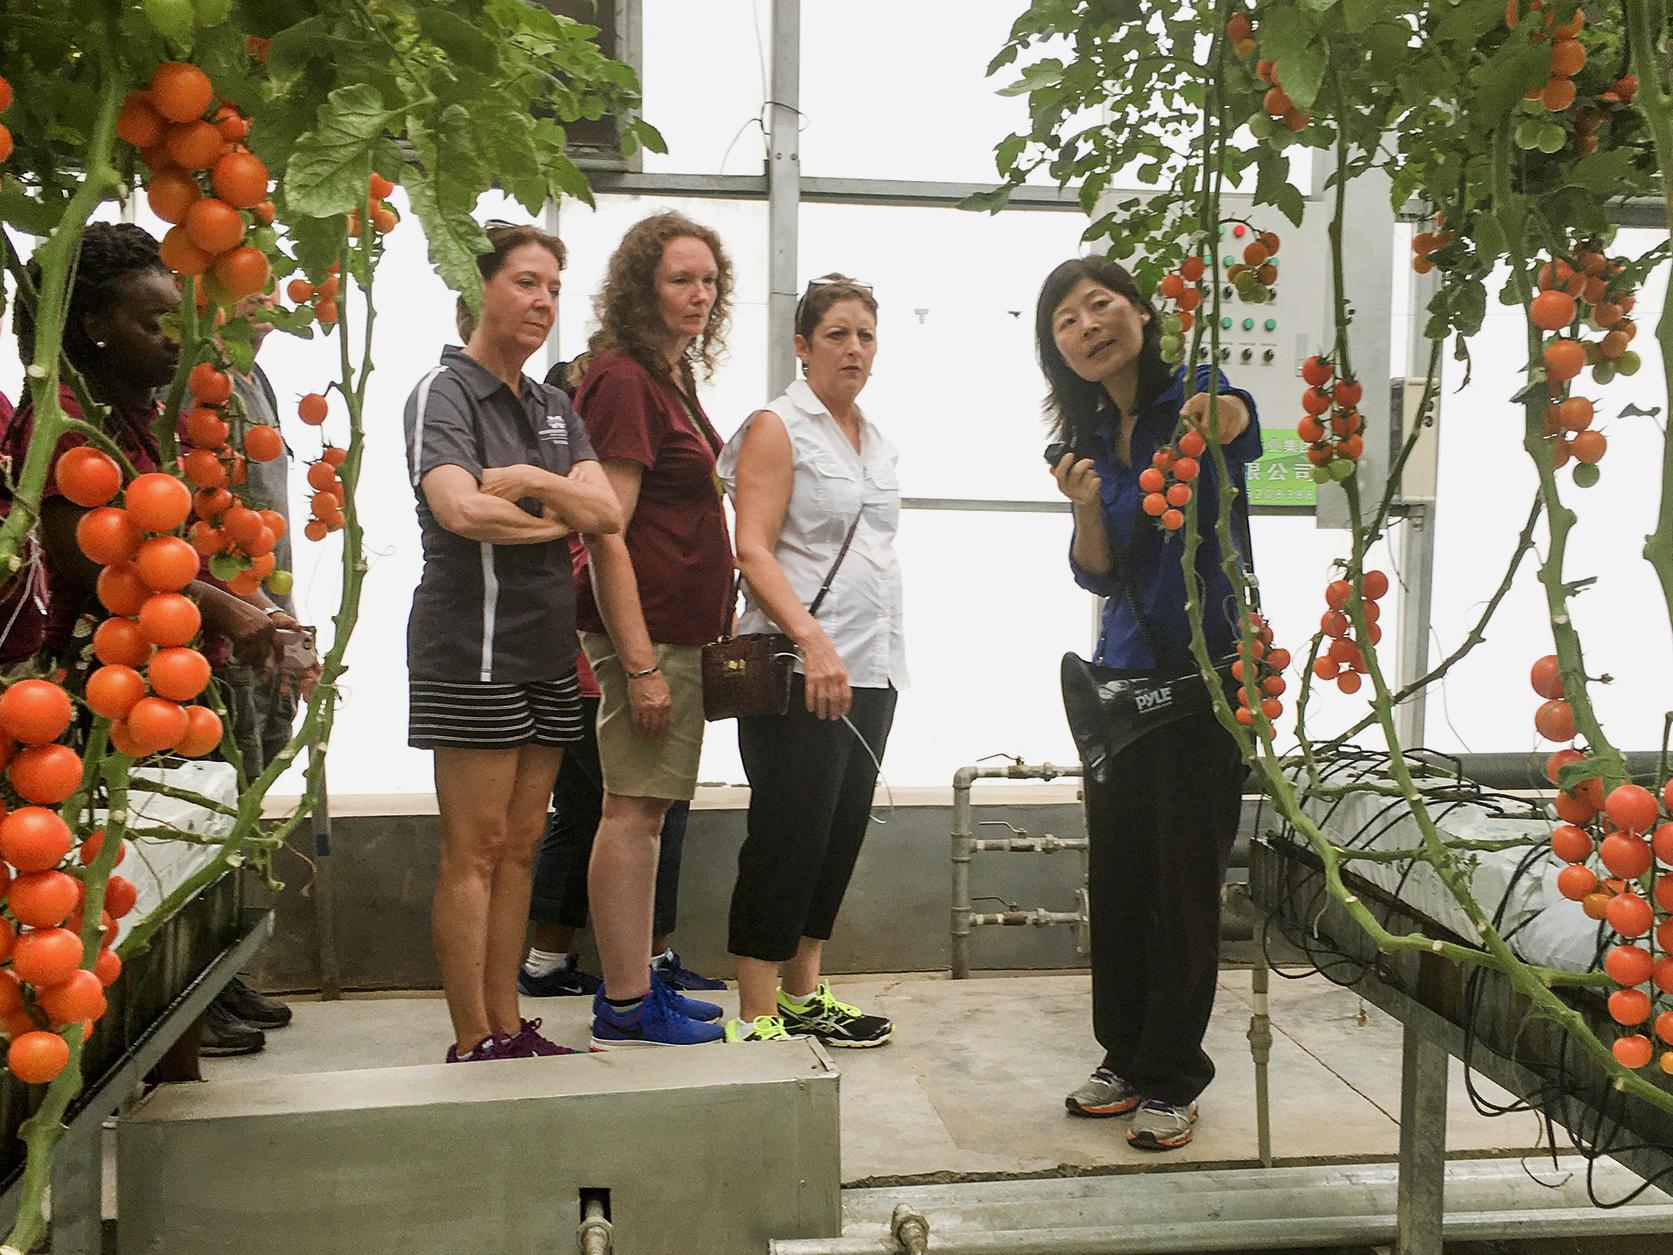 Mississippi State University plant and soil sciences associate professor Guihong Bi, right, shows tomatoes being grown at a Shandong Shouguang Vegetable Industry Group greenhouse to MSU Extension agents, from left, Emily Carter, Lanette Crocker and Lisa Stewart on June 20, 2016. (Photo by MSU Extension Service/Nathan Gregory)